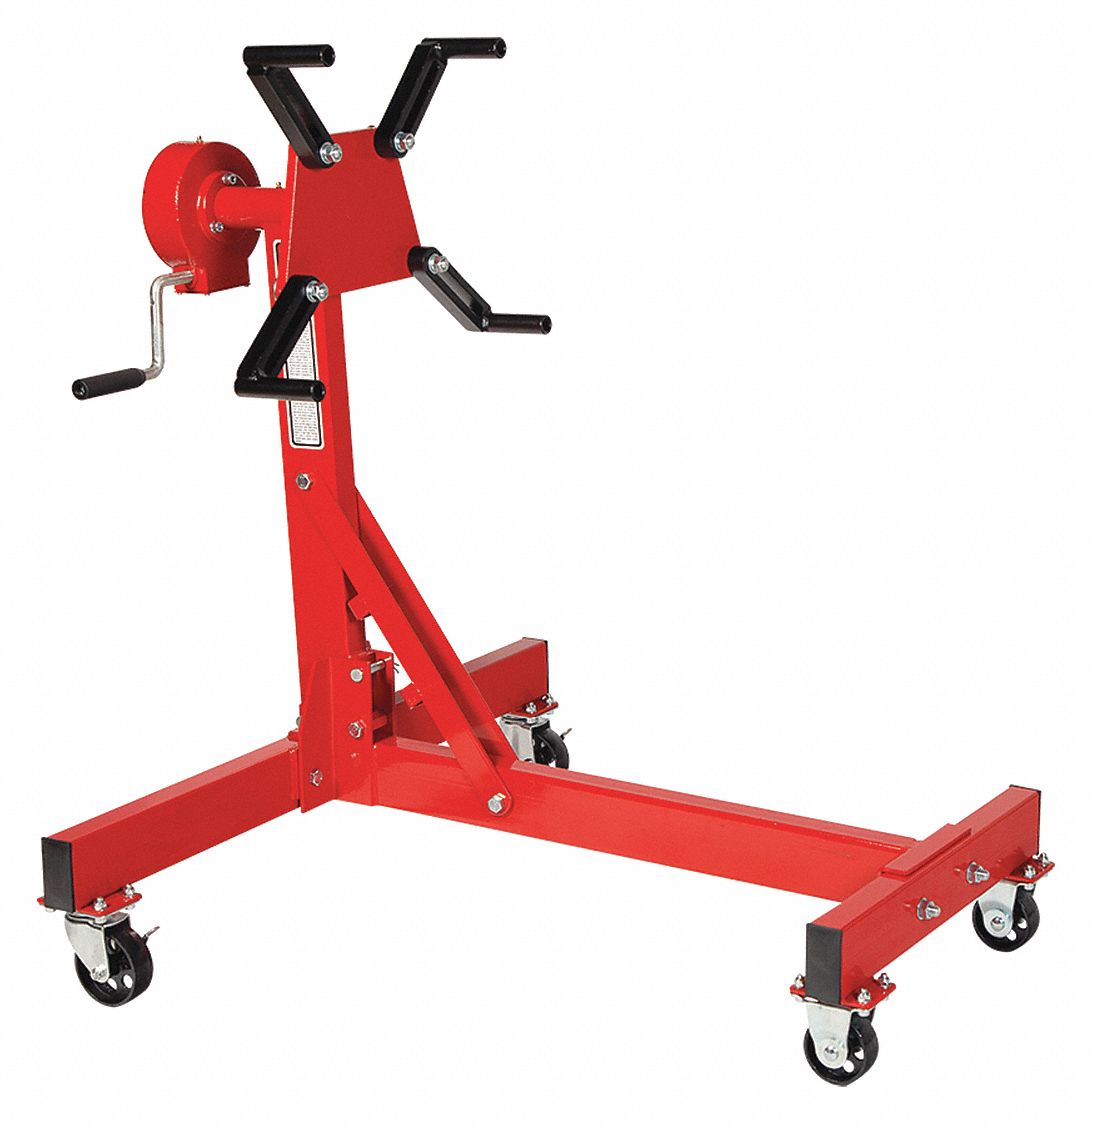 Deluxe Geared Engine Stand,1000 lb.: 0.5 ton Load Capacity, 36 in Overall Ht